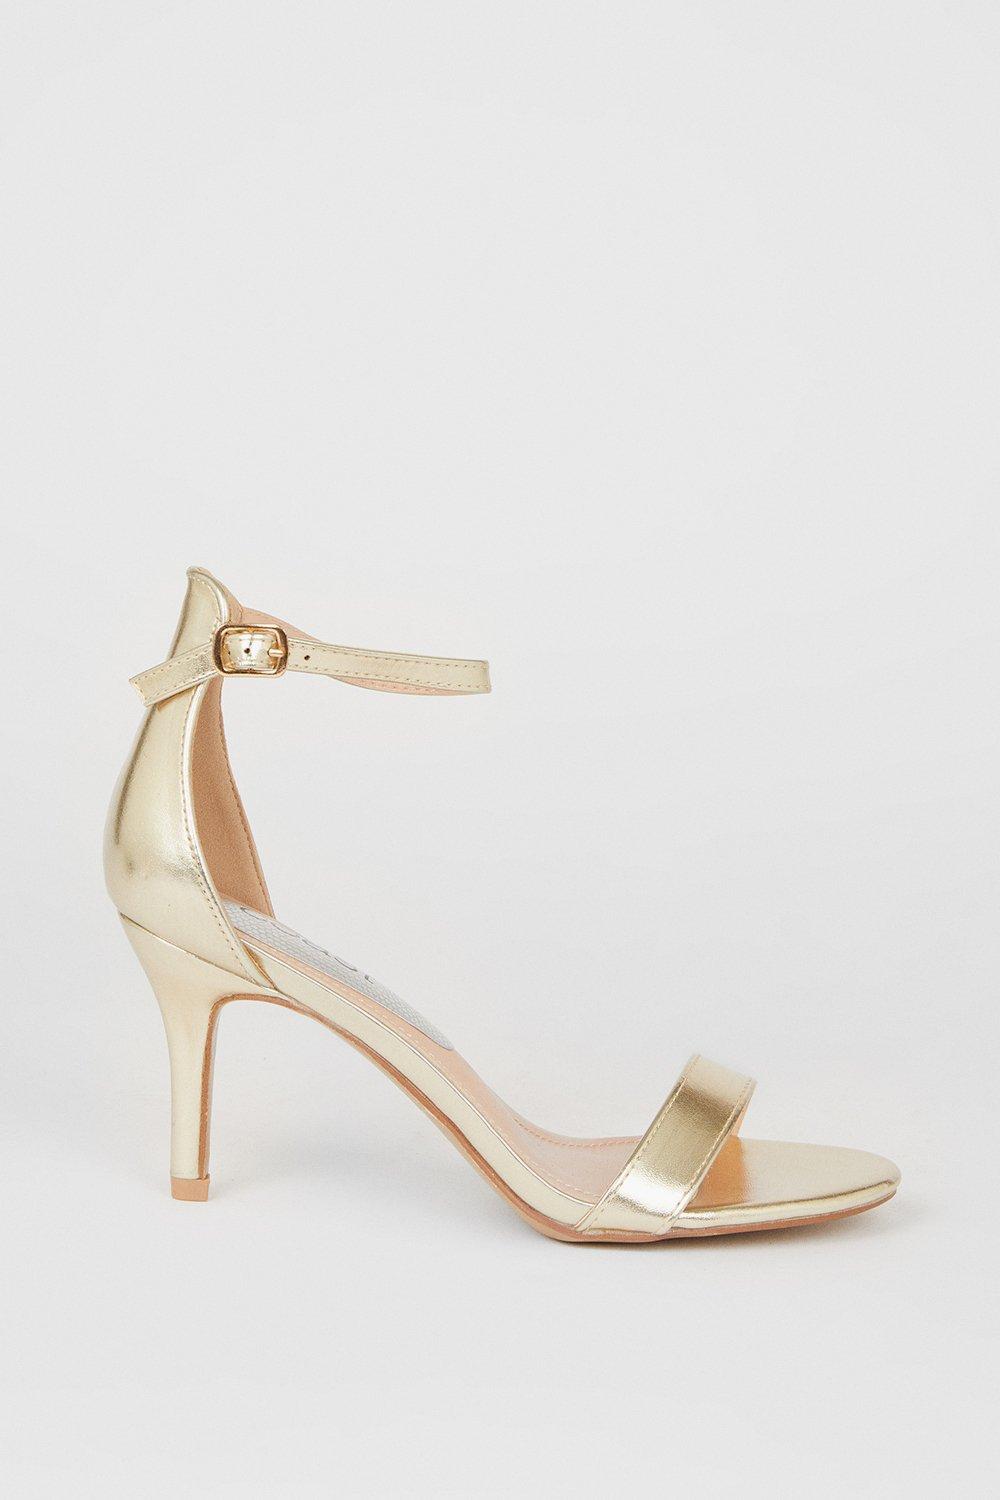 Trinnie Barely There Stiletto Heeled Sandals - Gold